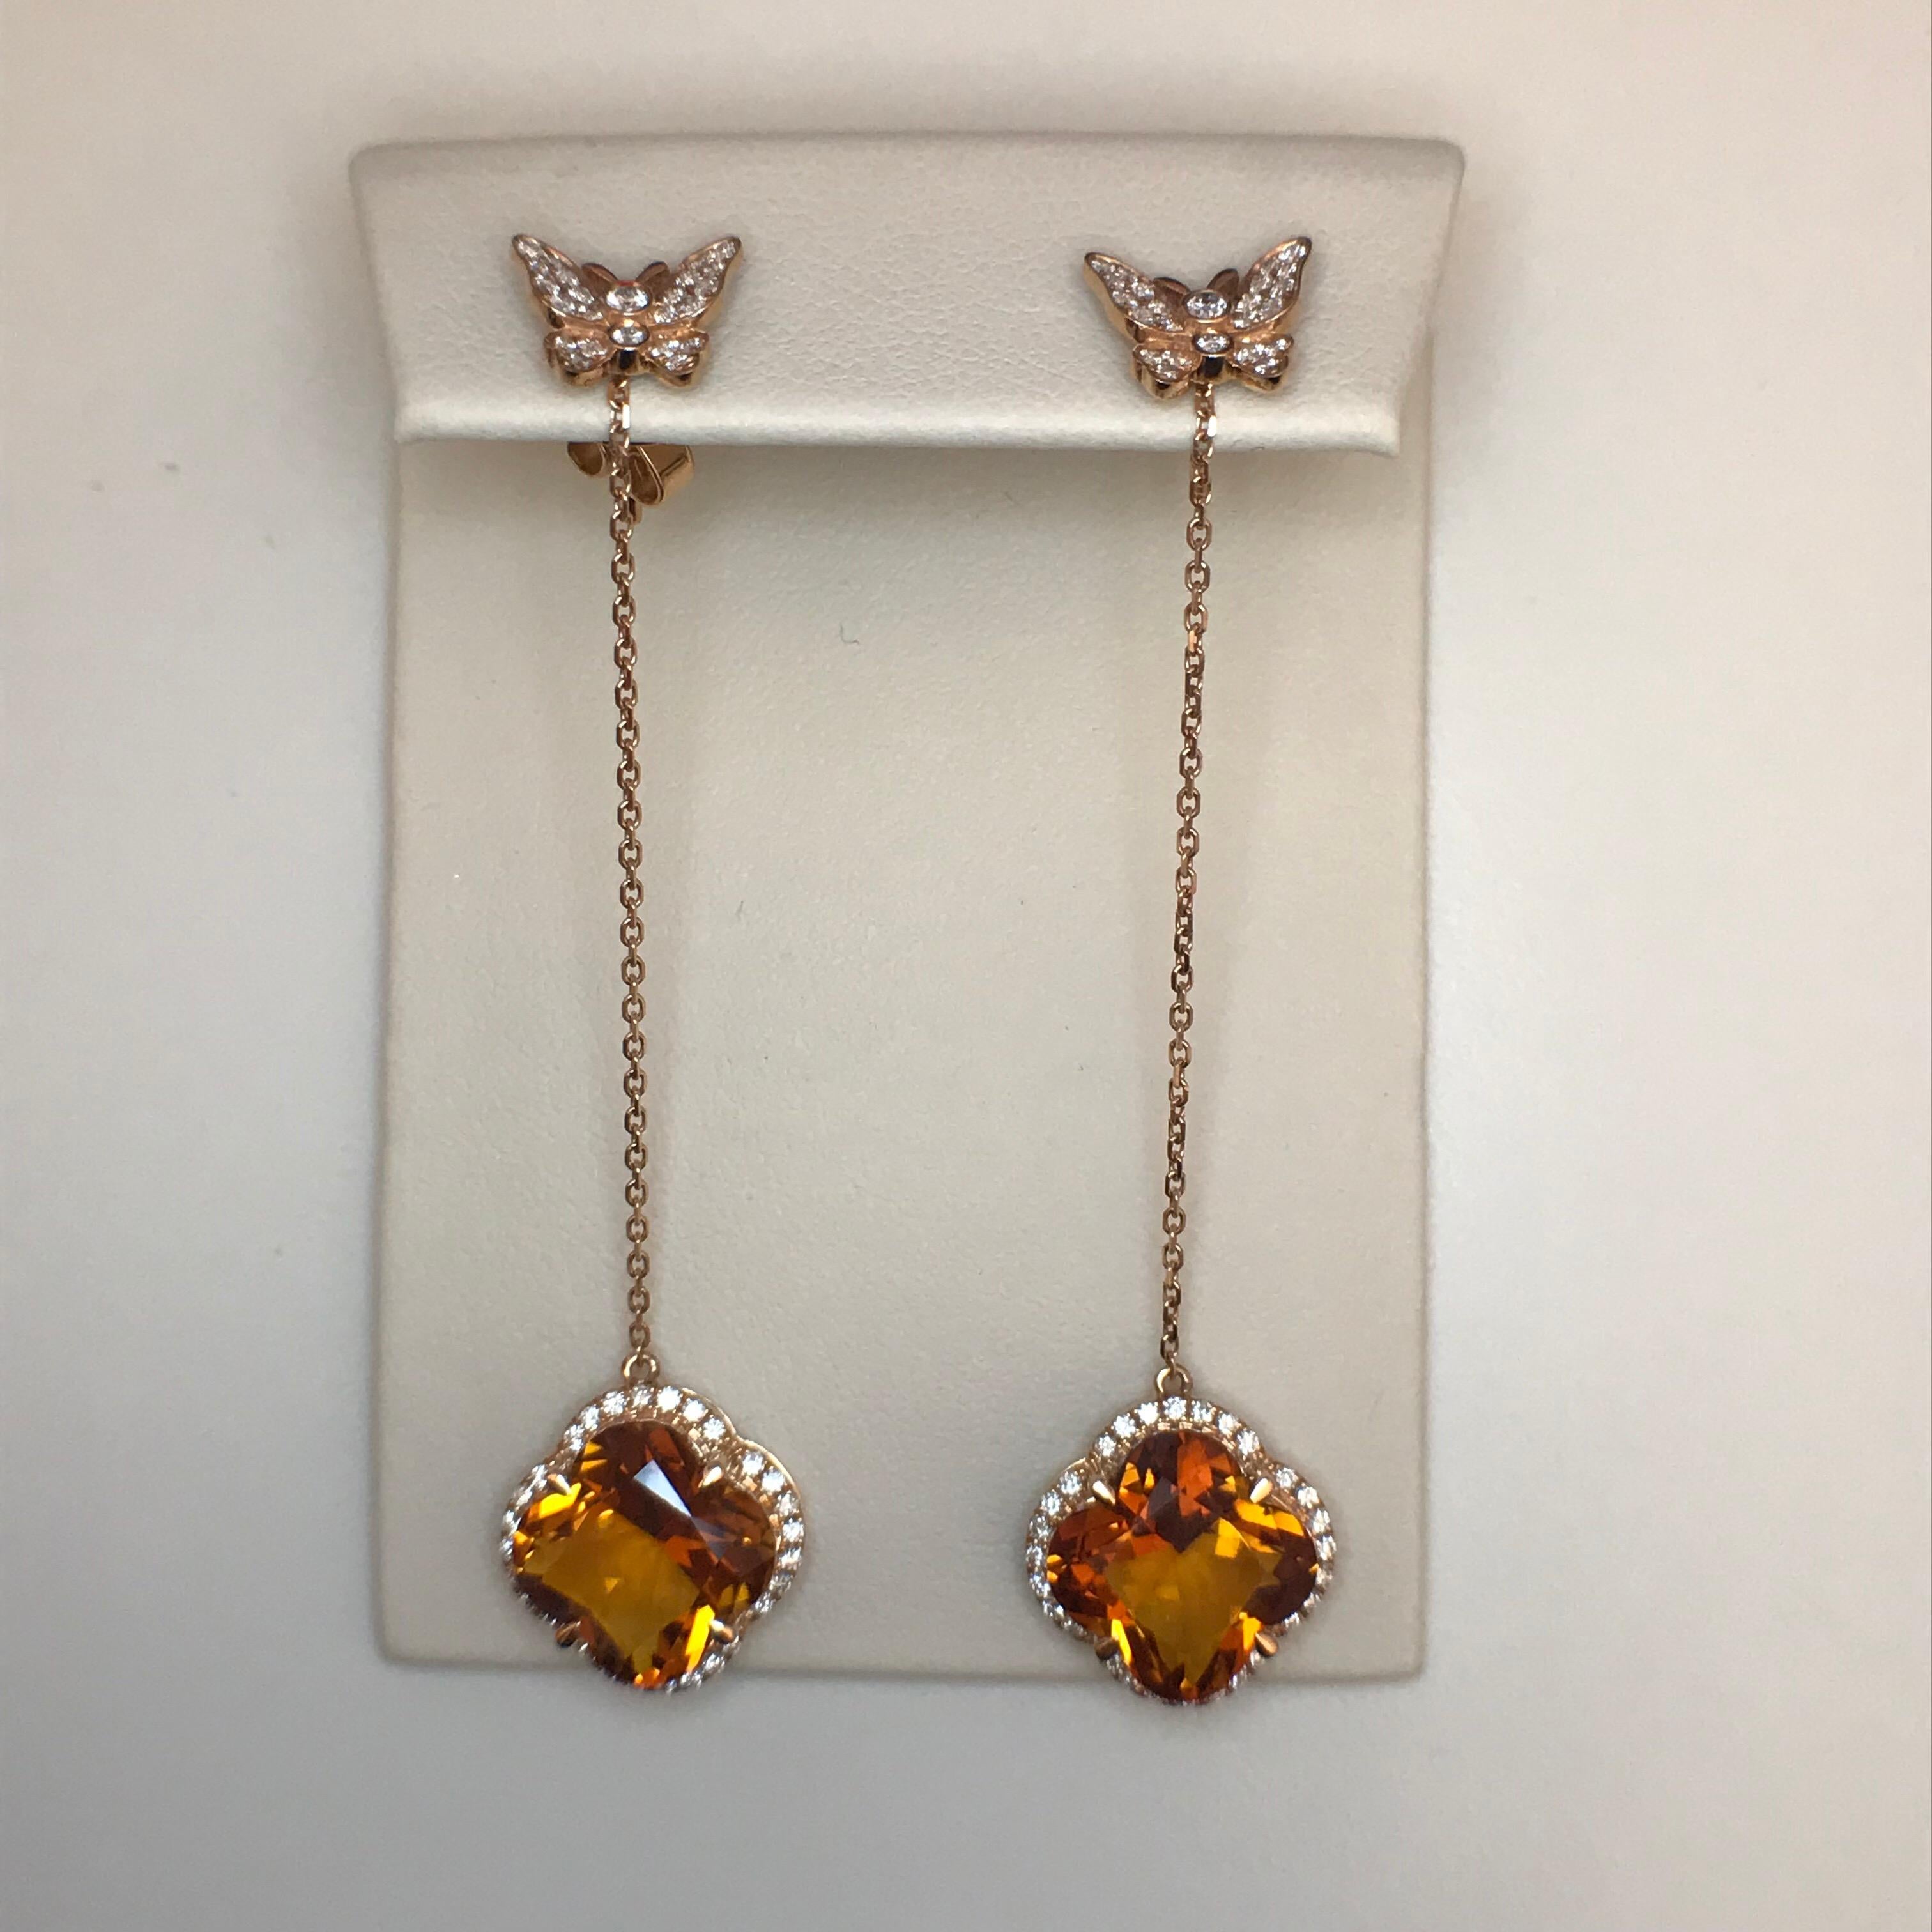 Yael Designs has created a pair of convertible earrings featuring special clover-cut Madeira Citrines dangling from two diamond pave butterflies that can be worn as studs alone! 

18kt Rose Gold
Citrine 8.74ct
White Round Diamonds 0.60ct (G color VS